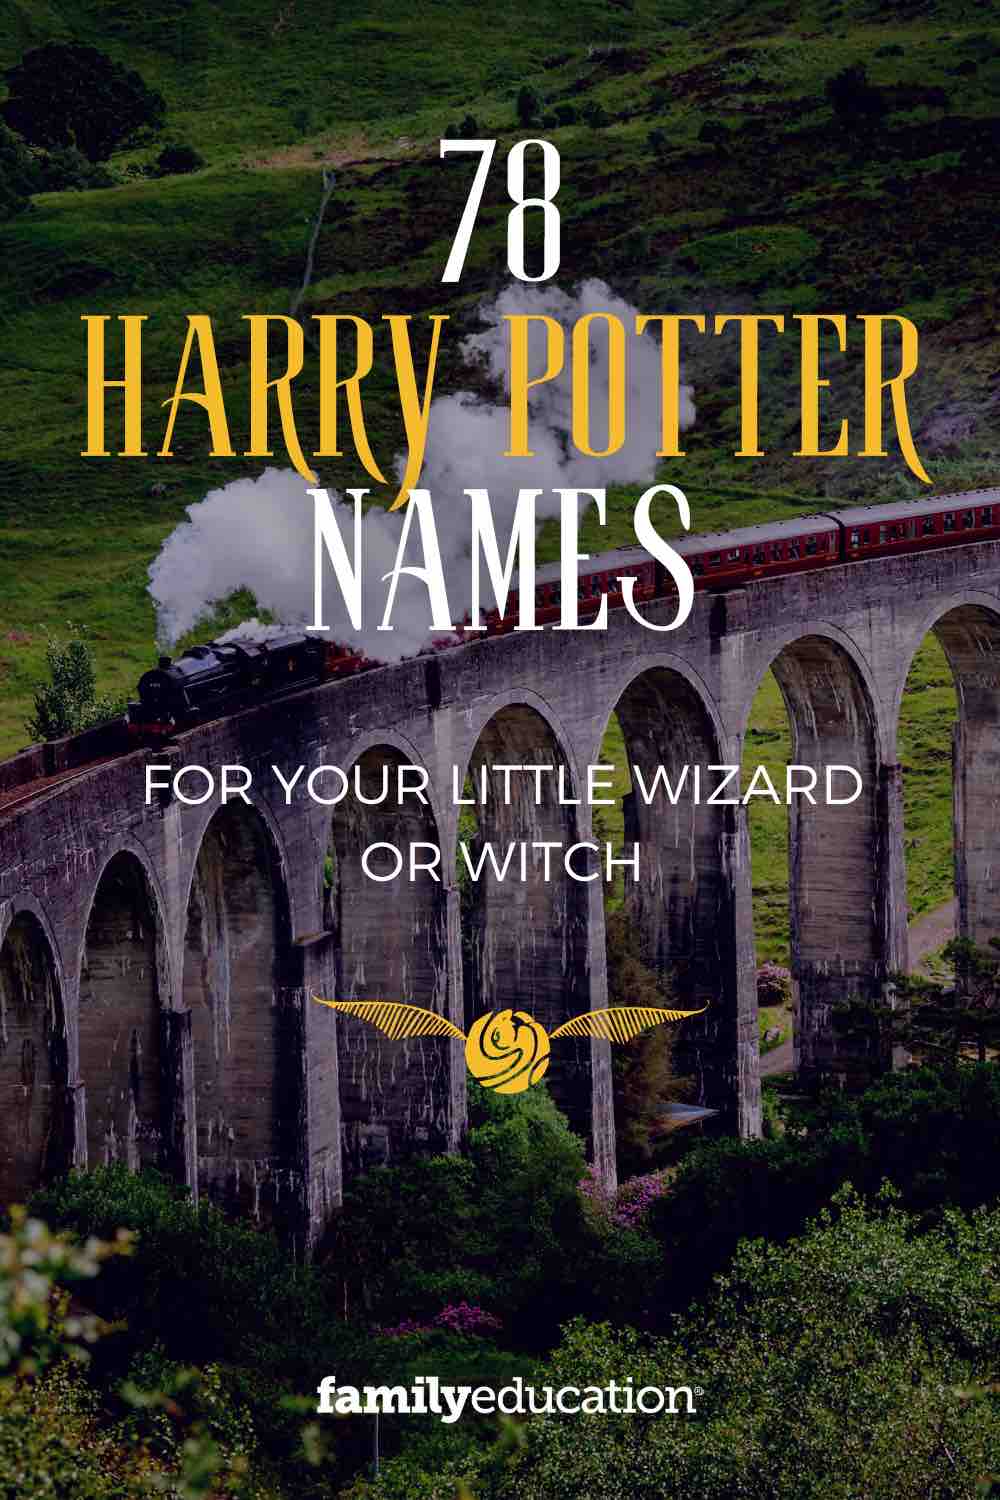 Harry Potter Inspired Names for Your Little Witch or Wizard